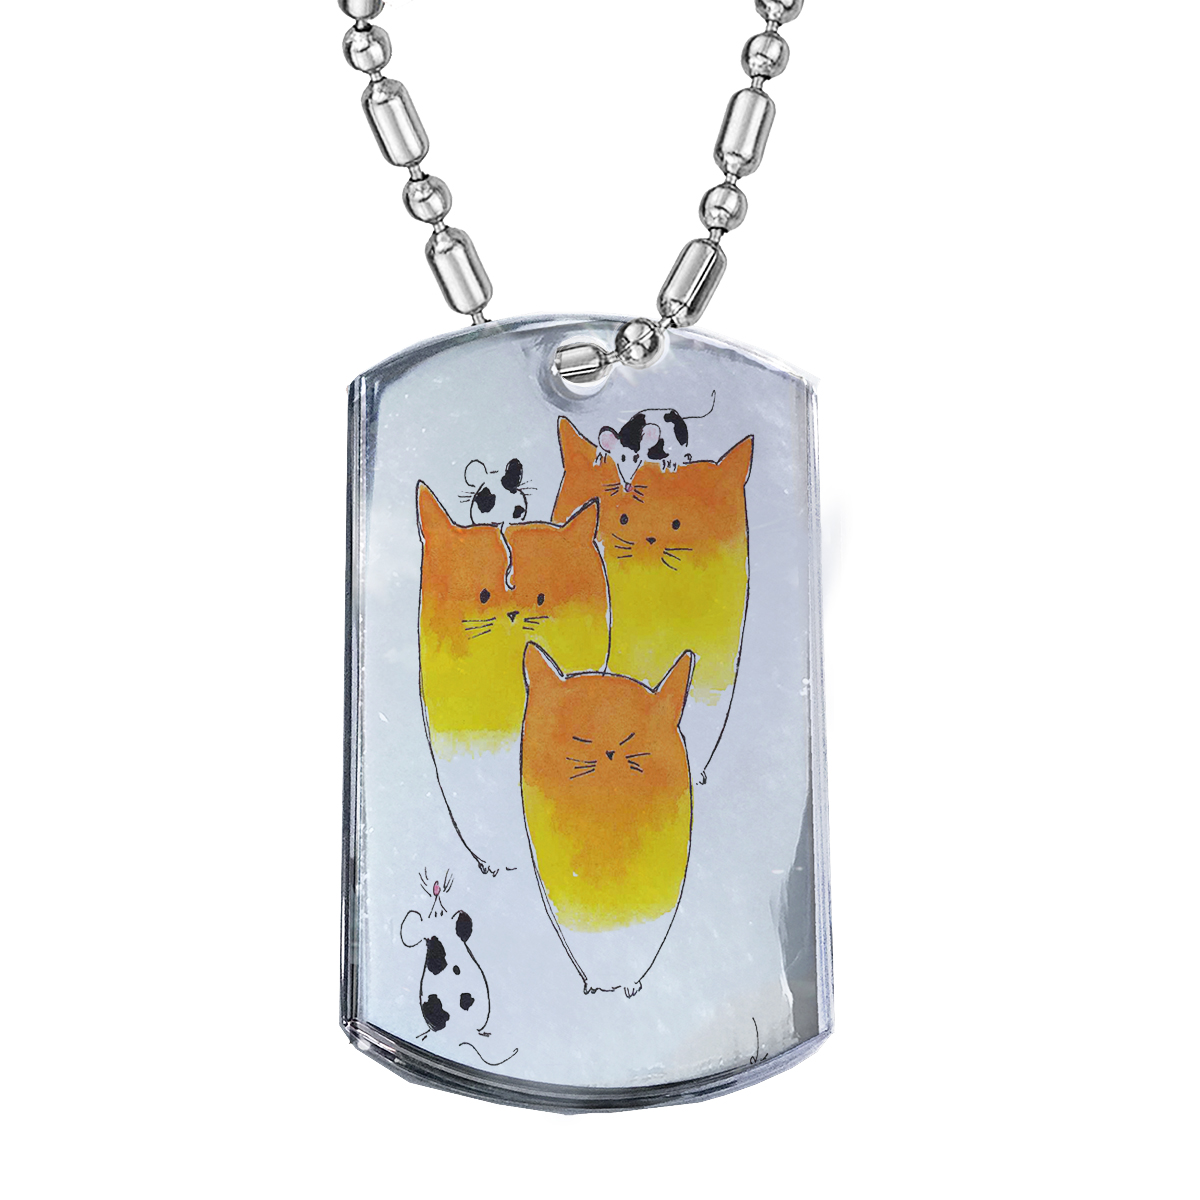 KuzmarK Silver Chrome Pendant Dog Tag Necklace - Black Spotted Mice with Candy Corn Kitties Abstract Cat Art by Denise Every - Copy Chrome Dog Tag Necklace - image 1 of 1